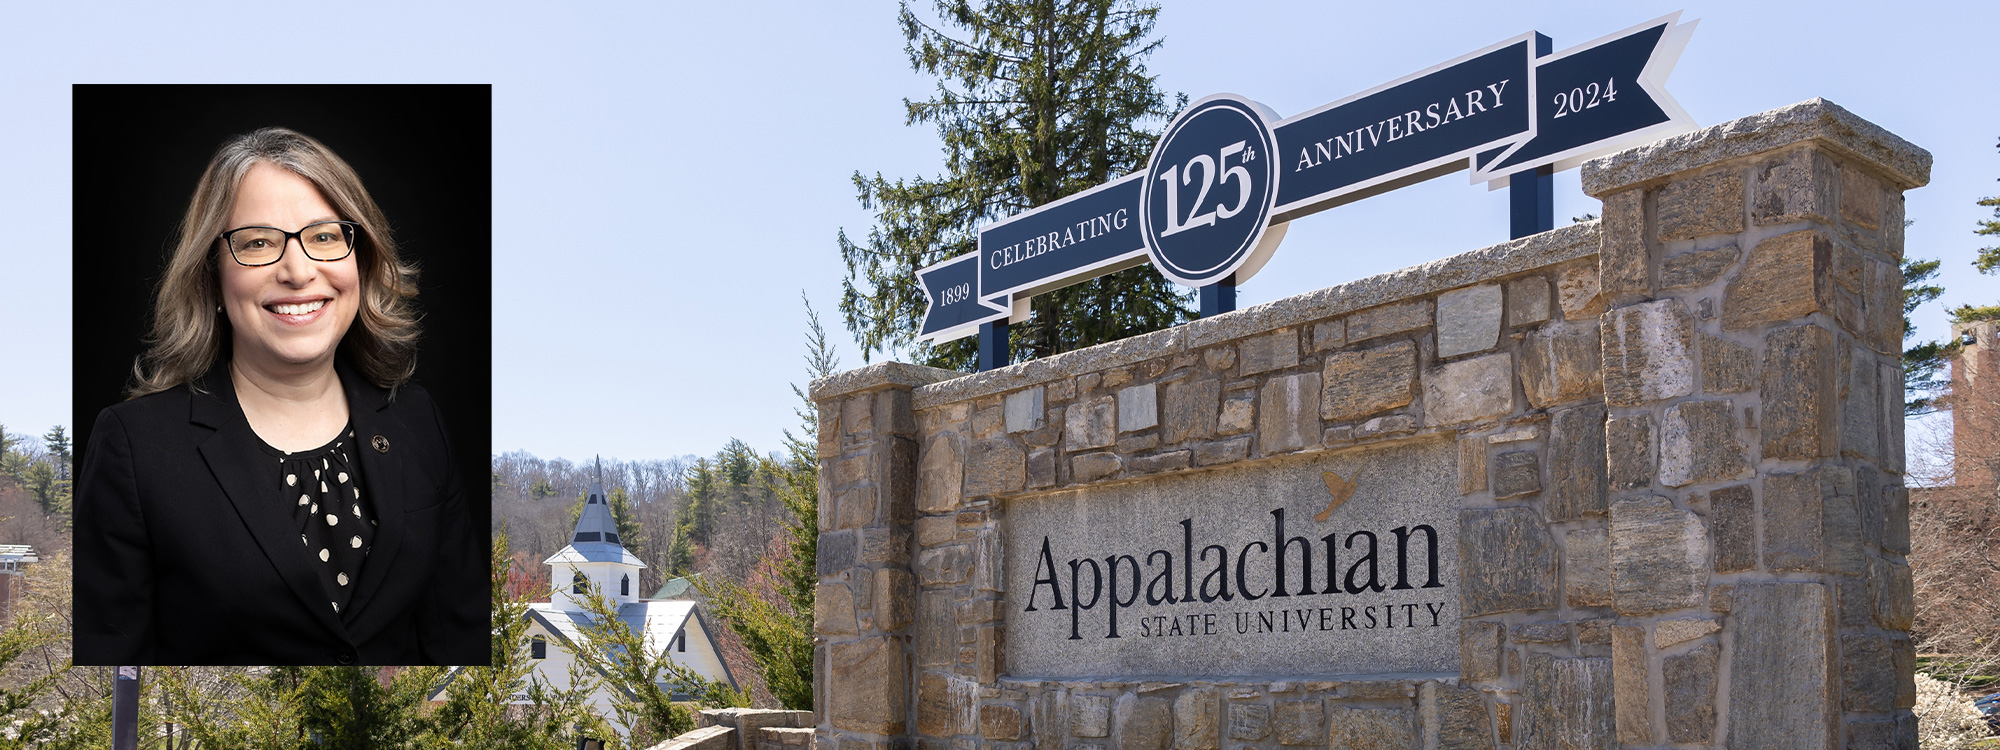 Interim chancellor named for Appalachian State University